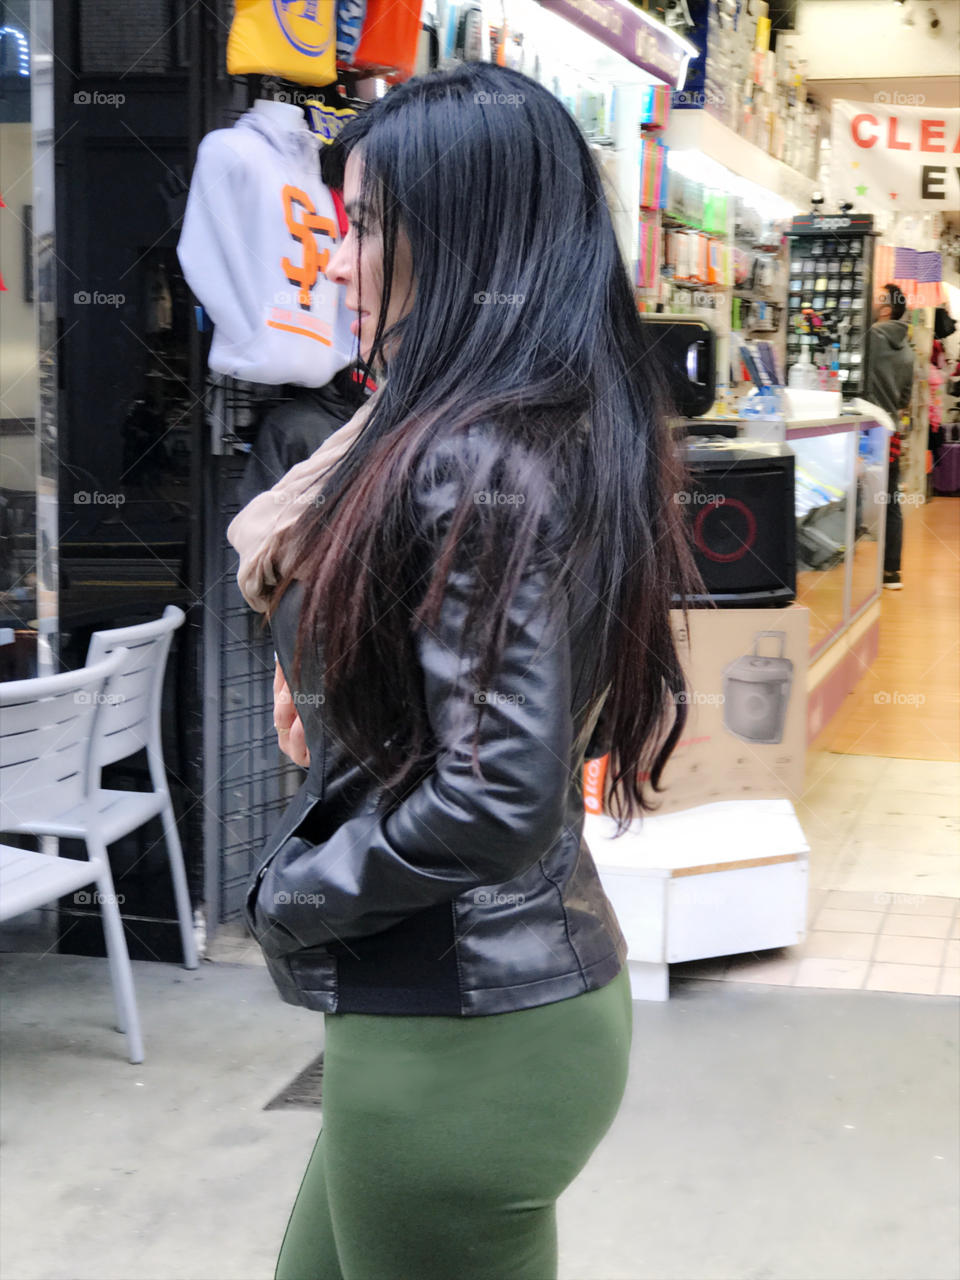 A walk in San Francisco California. Walking, fashion, brunette, long hair, leather jacket, outdoors, spring, autum, winter, travel, posture, focused 